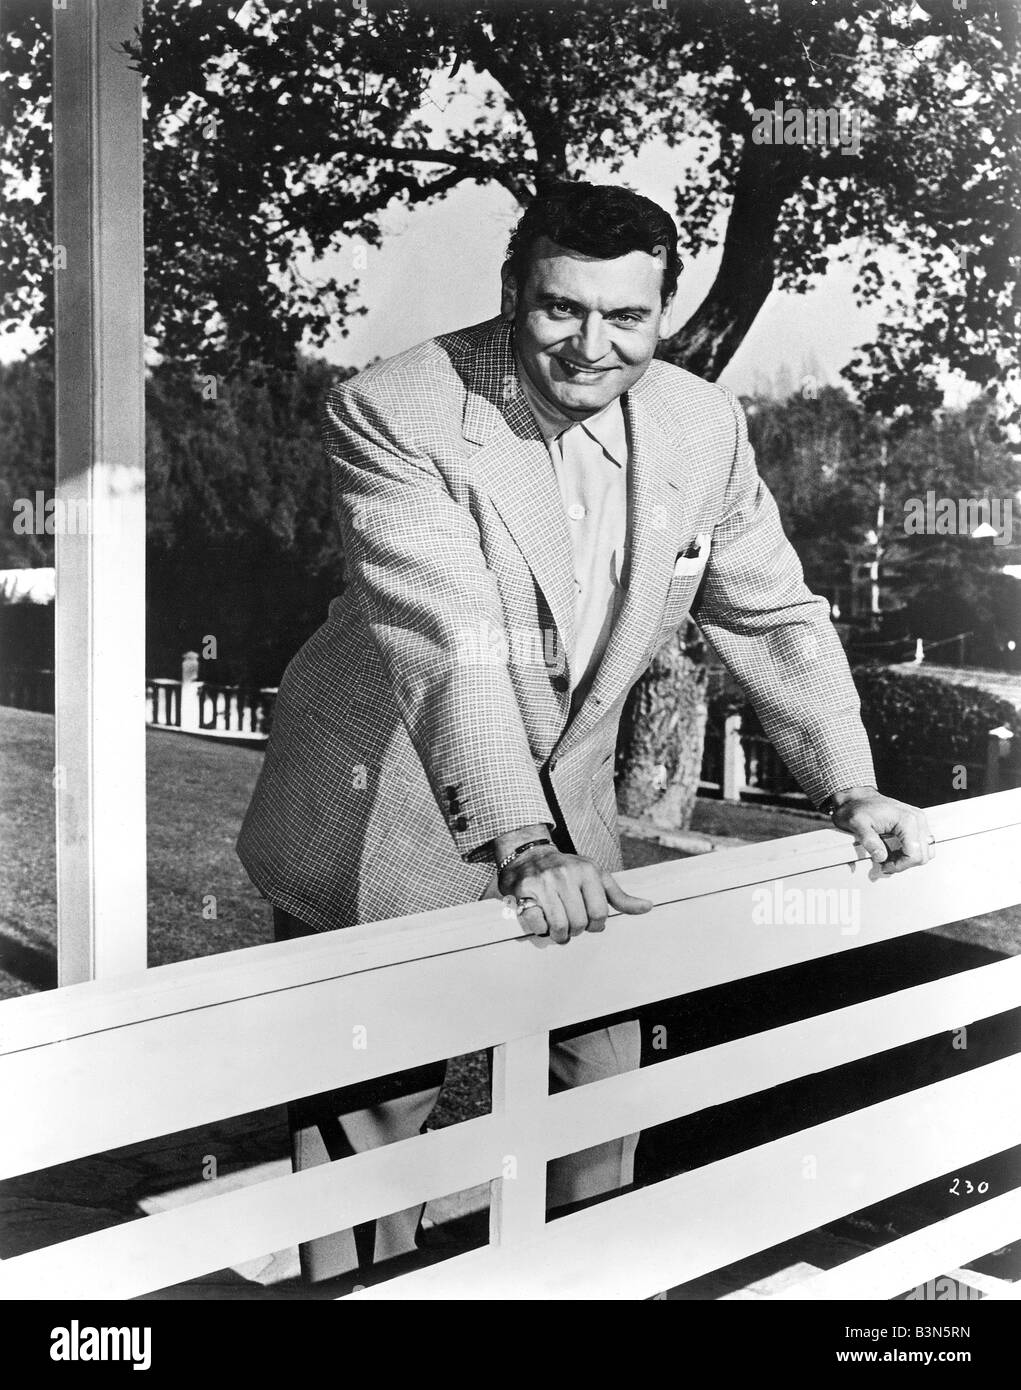 FRANKIE LAINE   US singer and actor Stock Photo